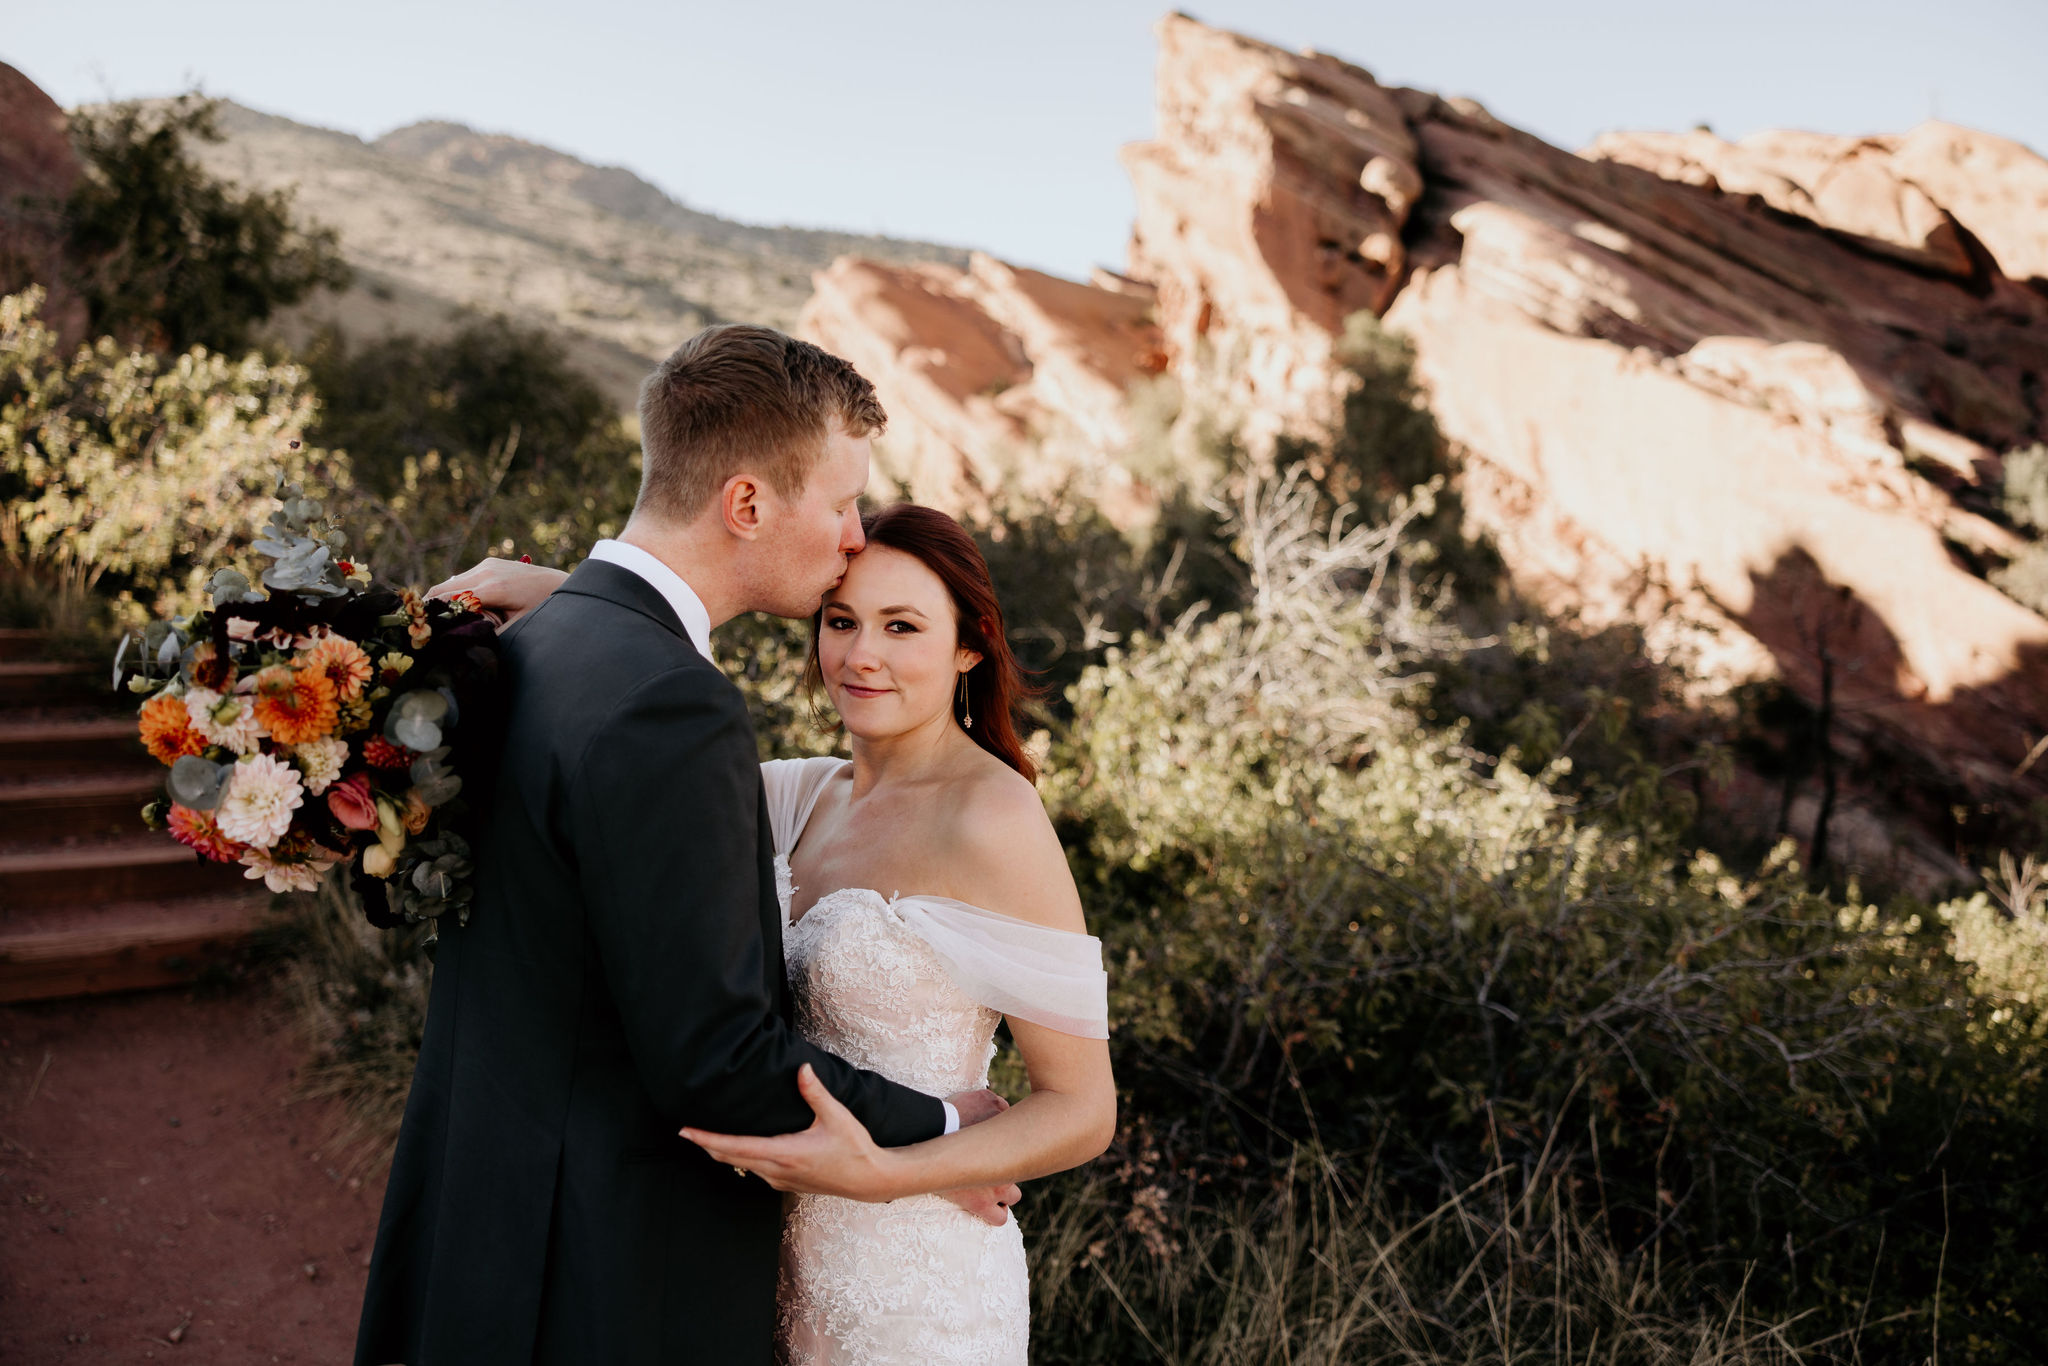 groom kisses brides head with towering red rocks in the background.